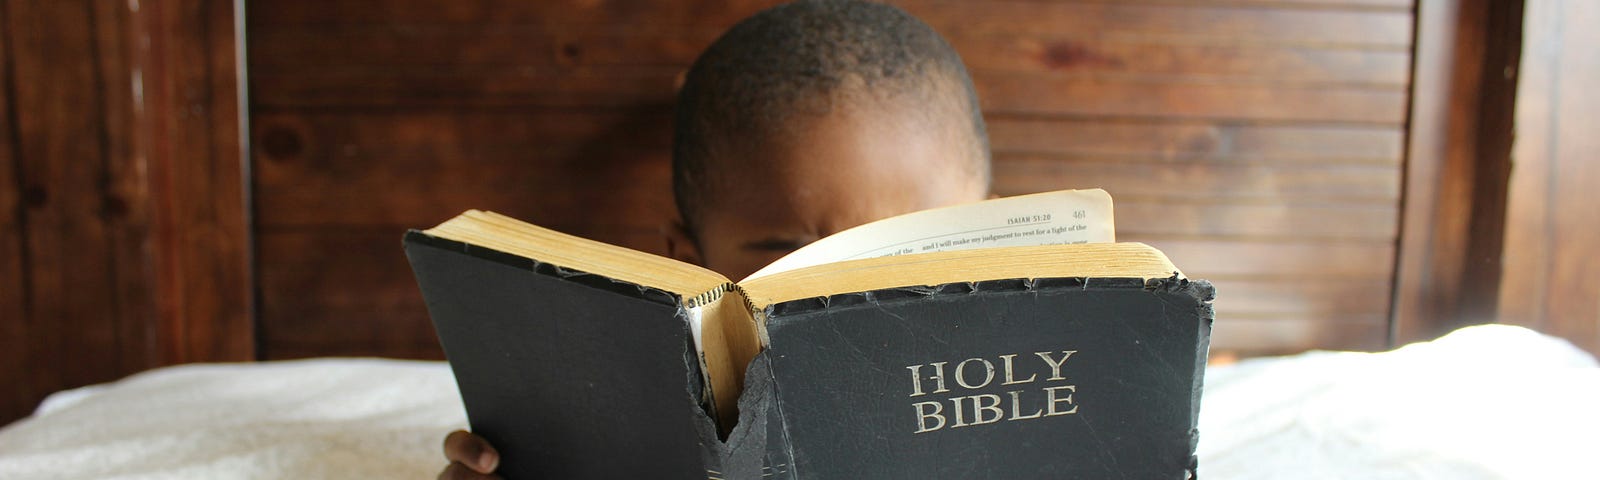 Young boy reading a bible in bed.